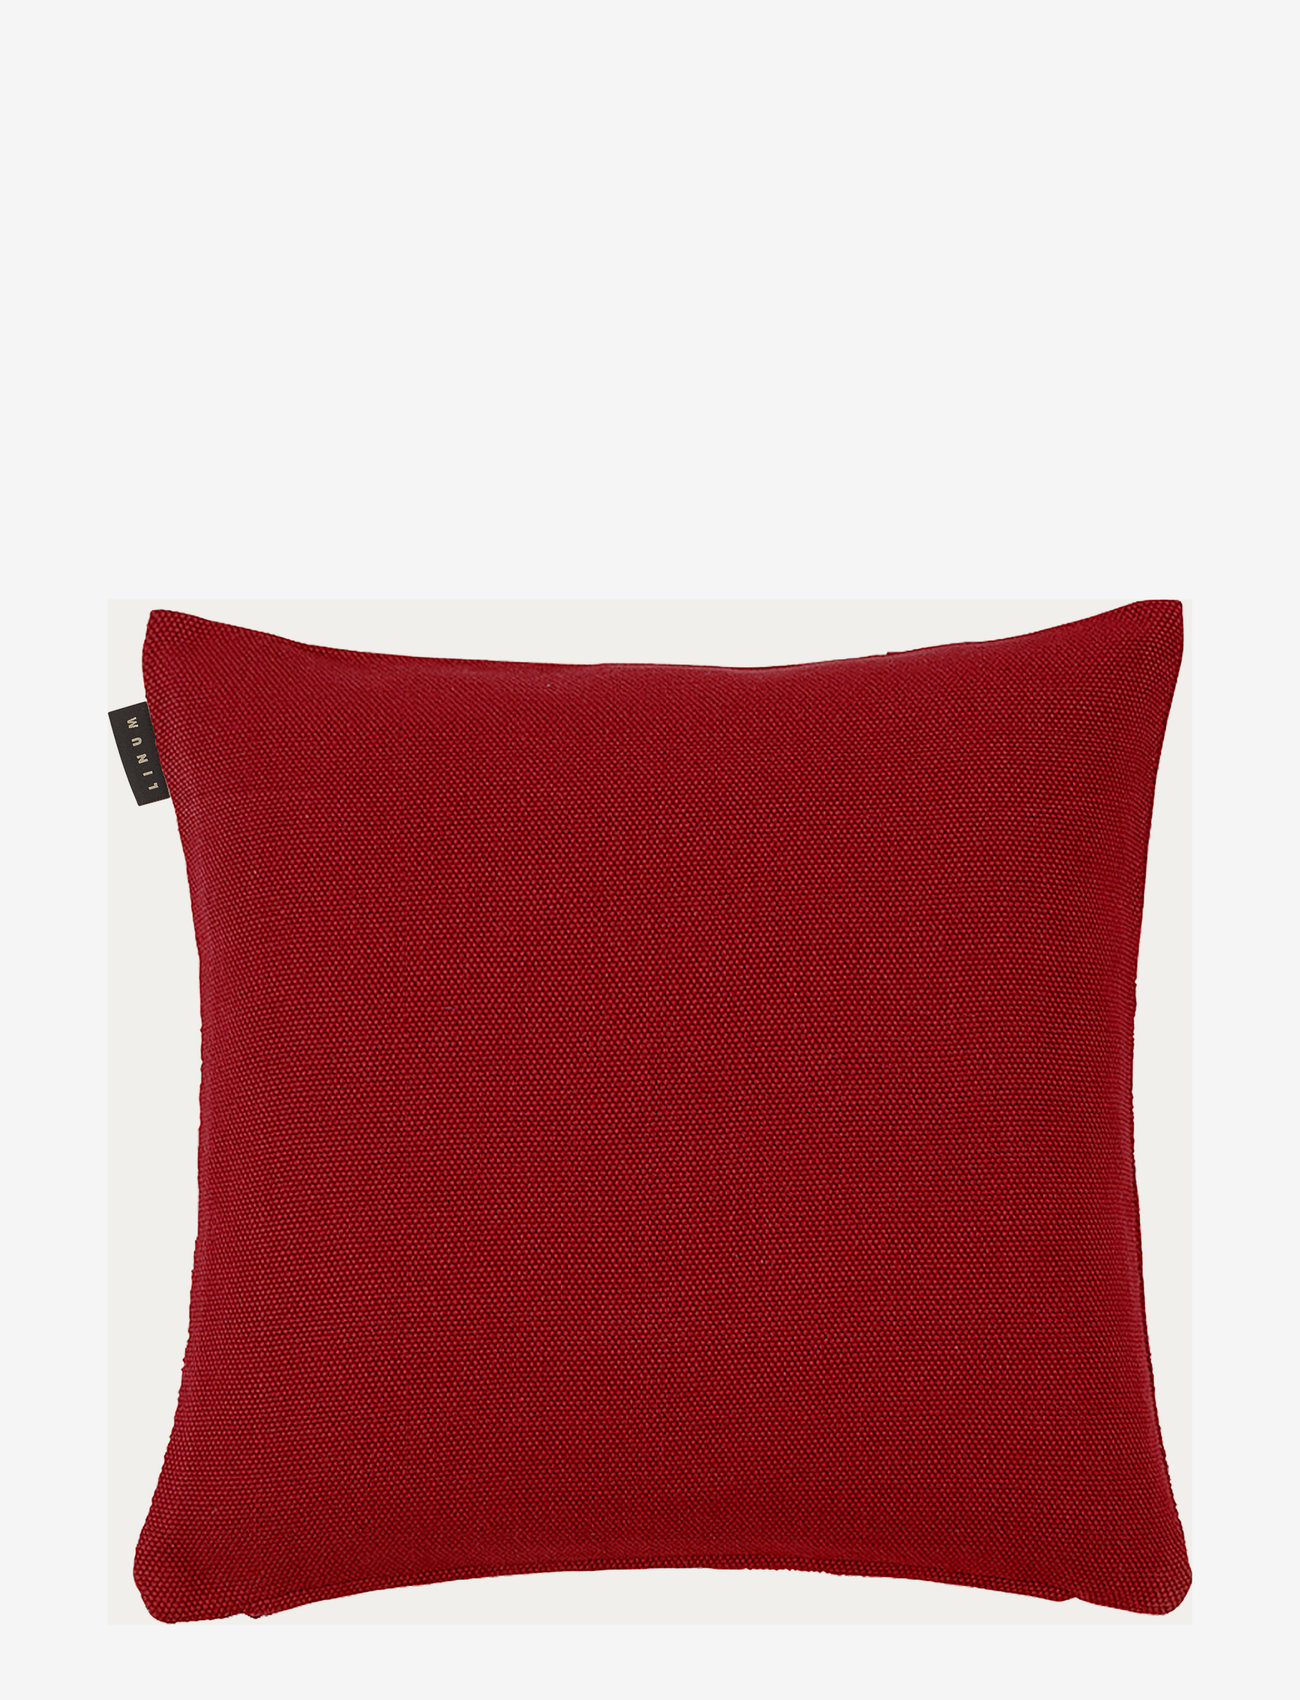 LINUM - PEPPER CUSHION COVER - lowest prices - red - 0